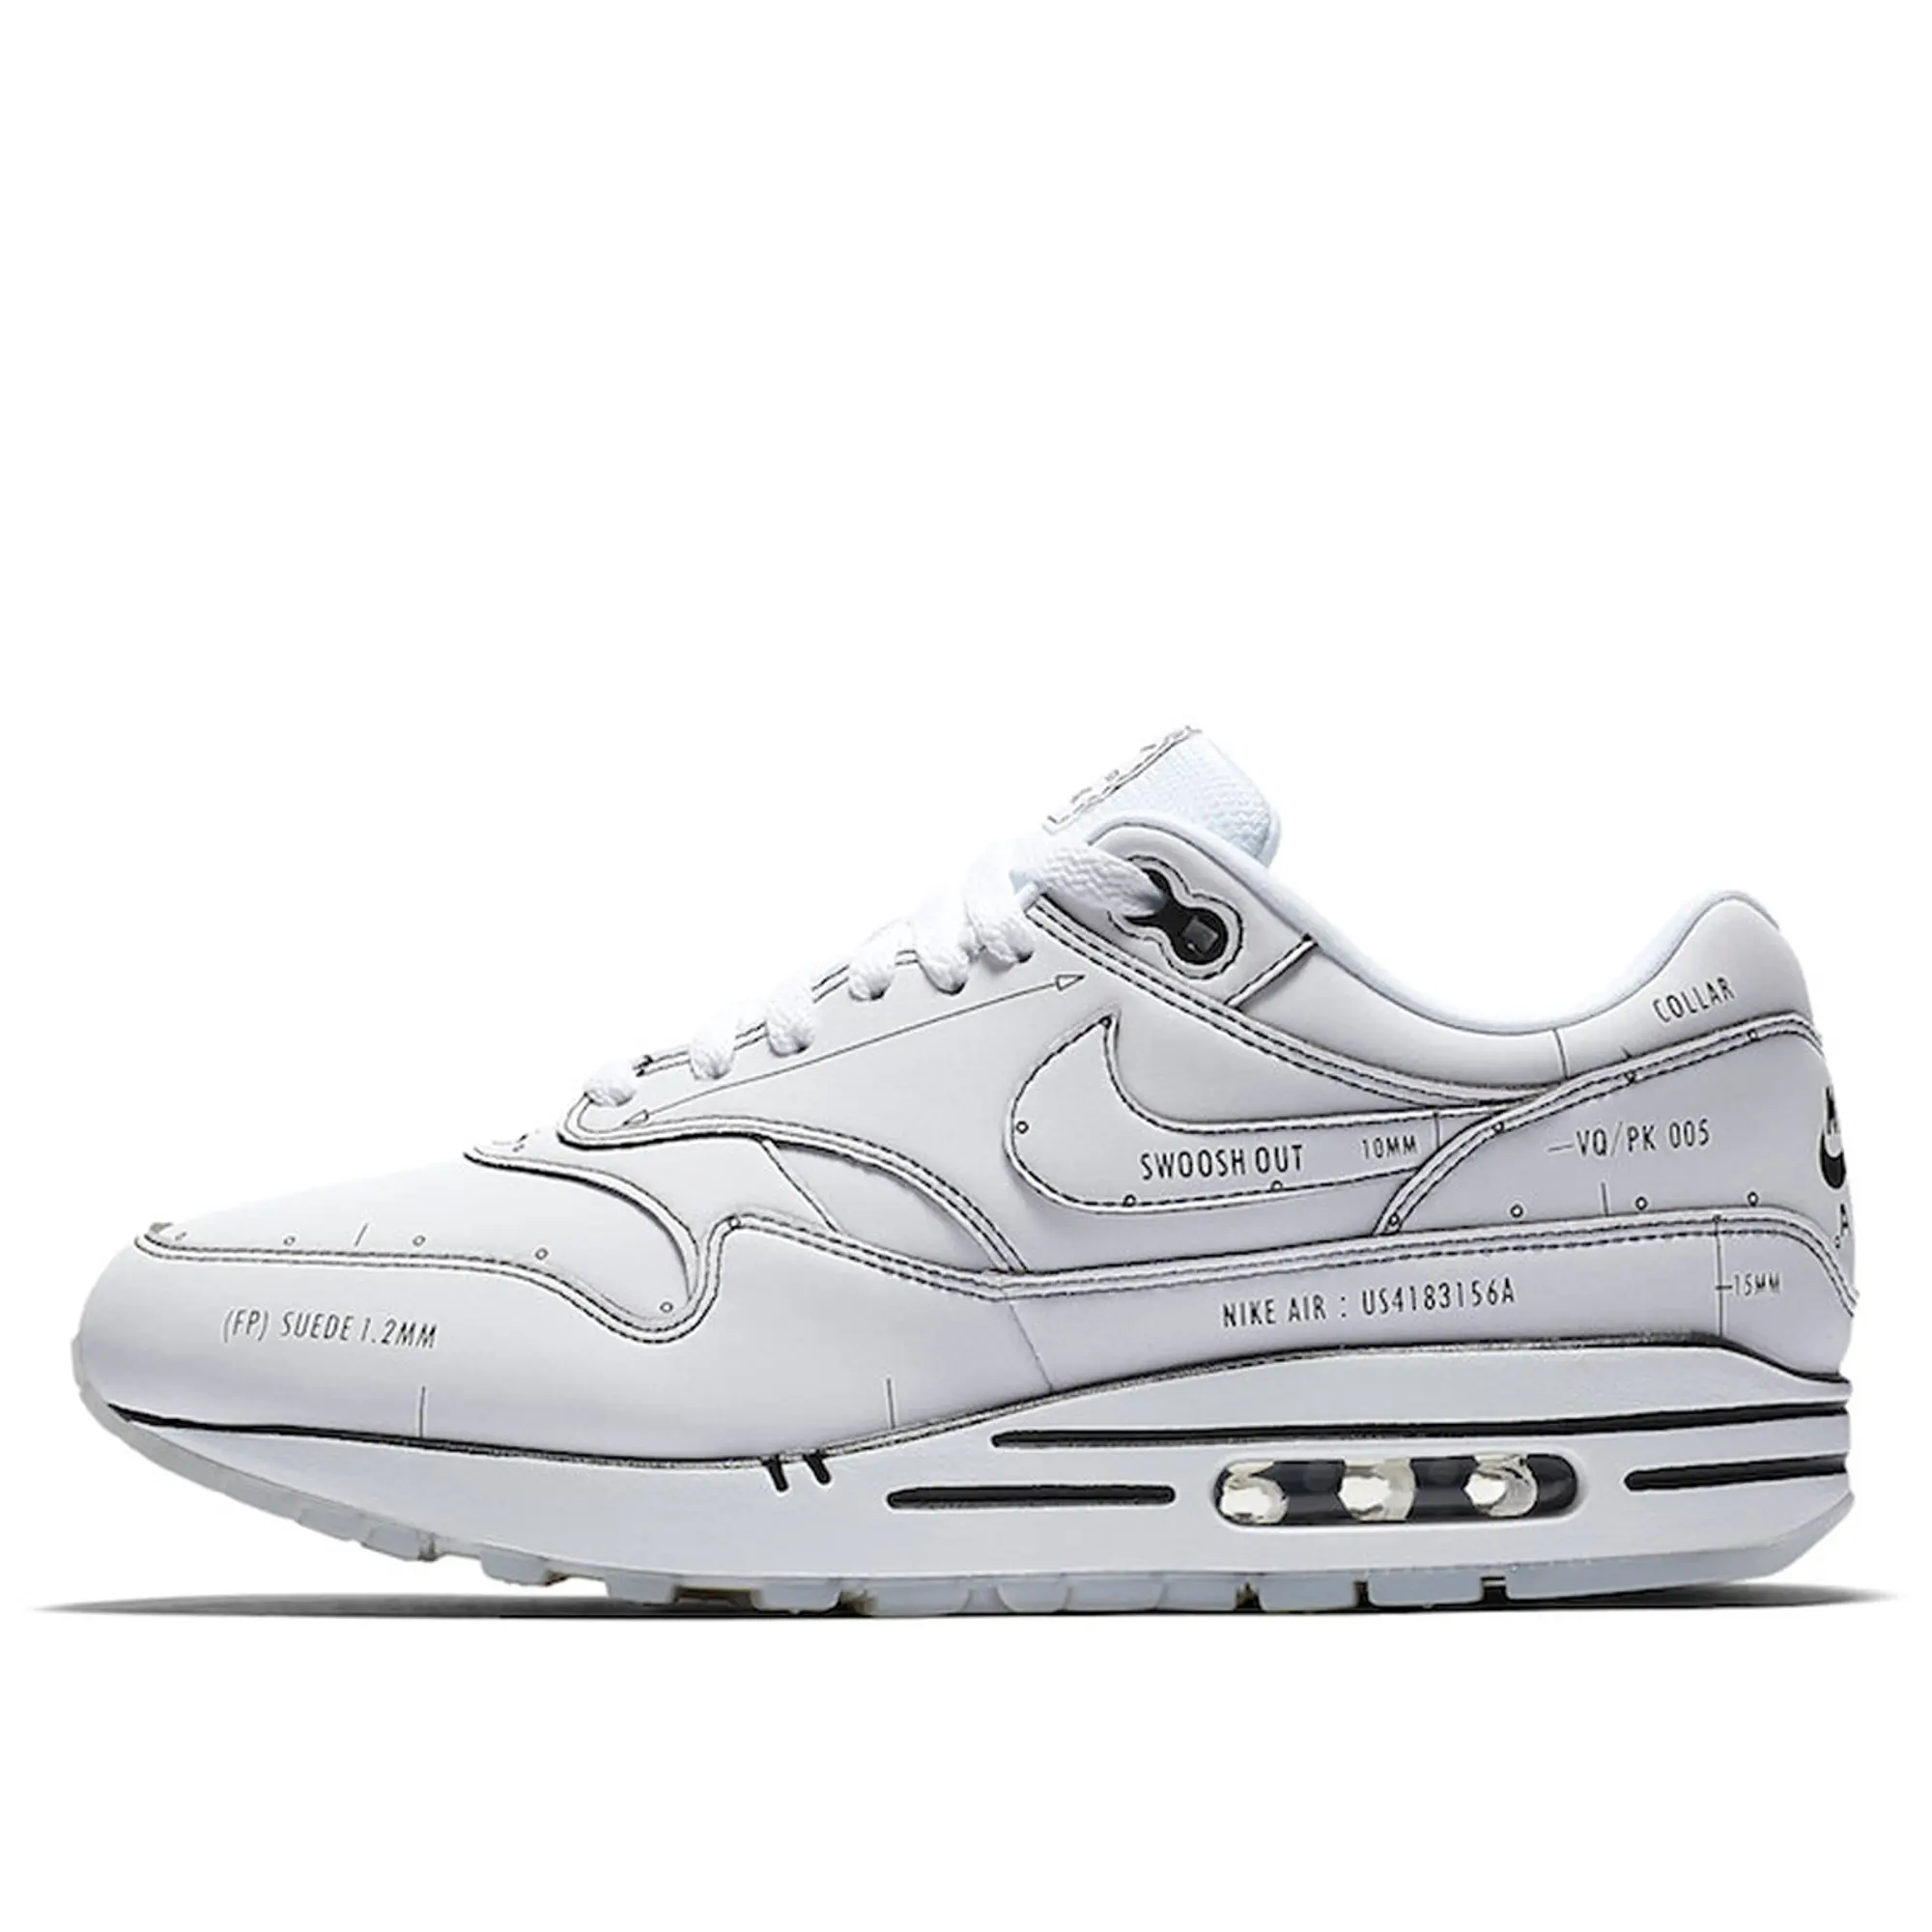 Nike Air Max 1 Tinker White Schematic